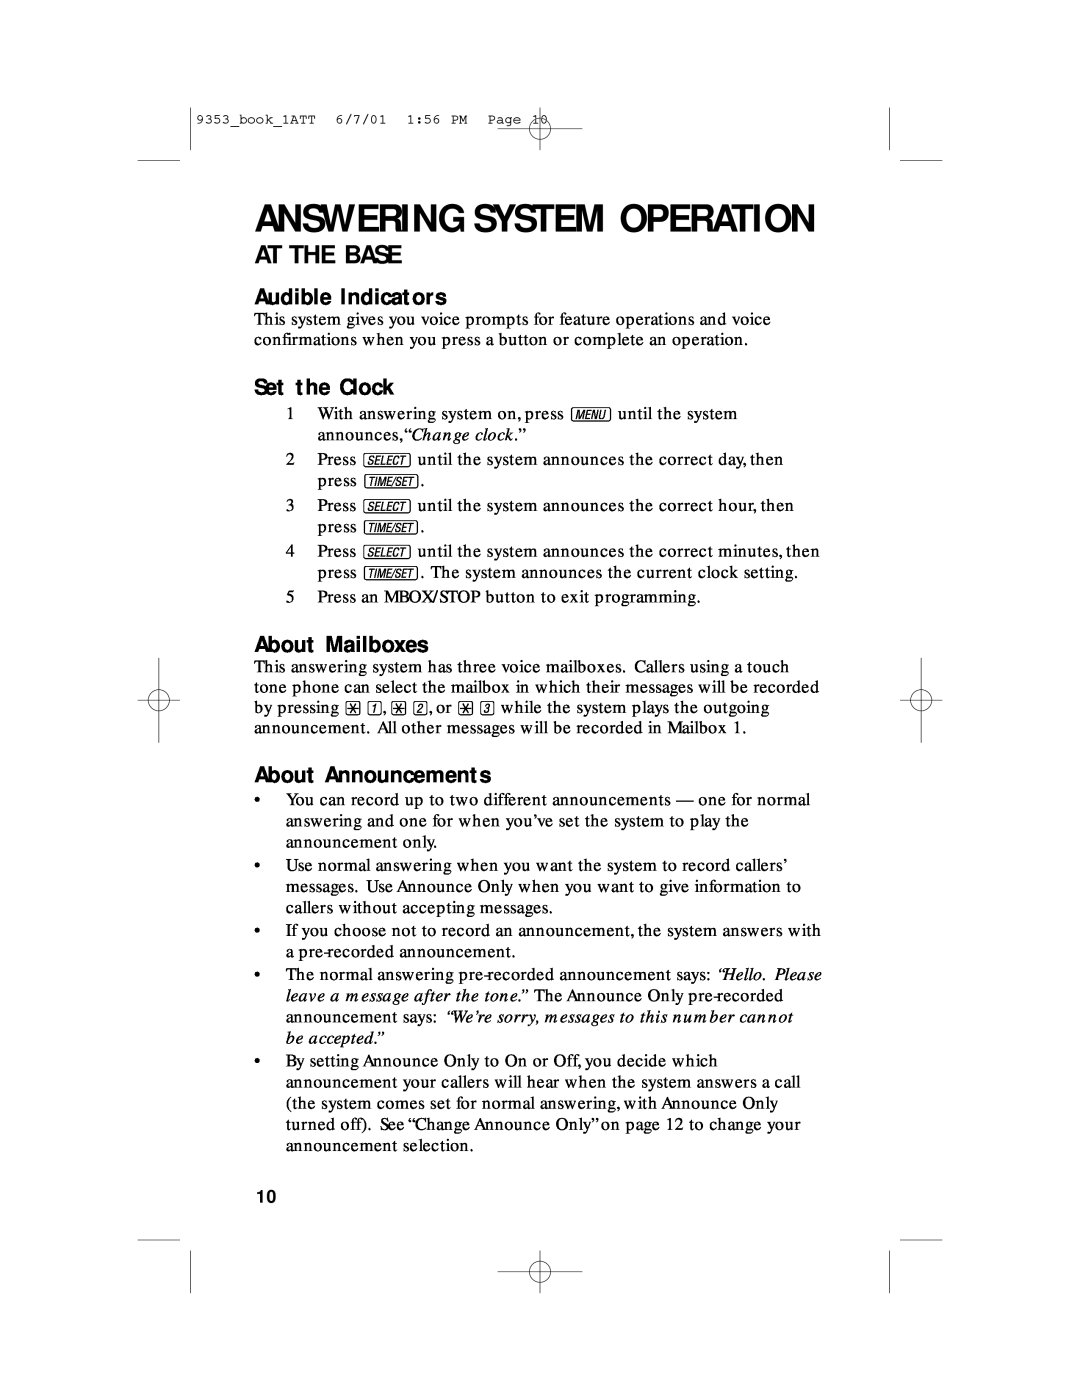 AT&T 9353 Answering System Operation, At The Base, Audible Indicators, Set the Clock, About Mailboxes, About Announcements 